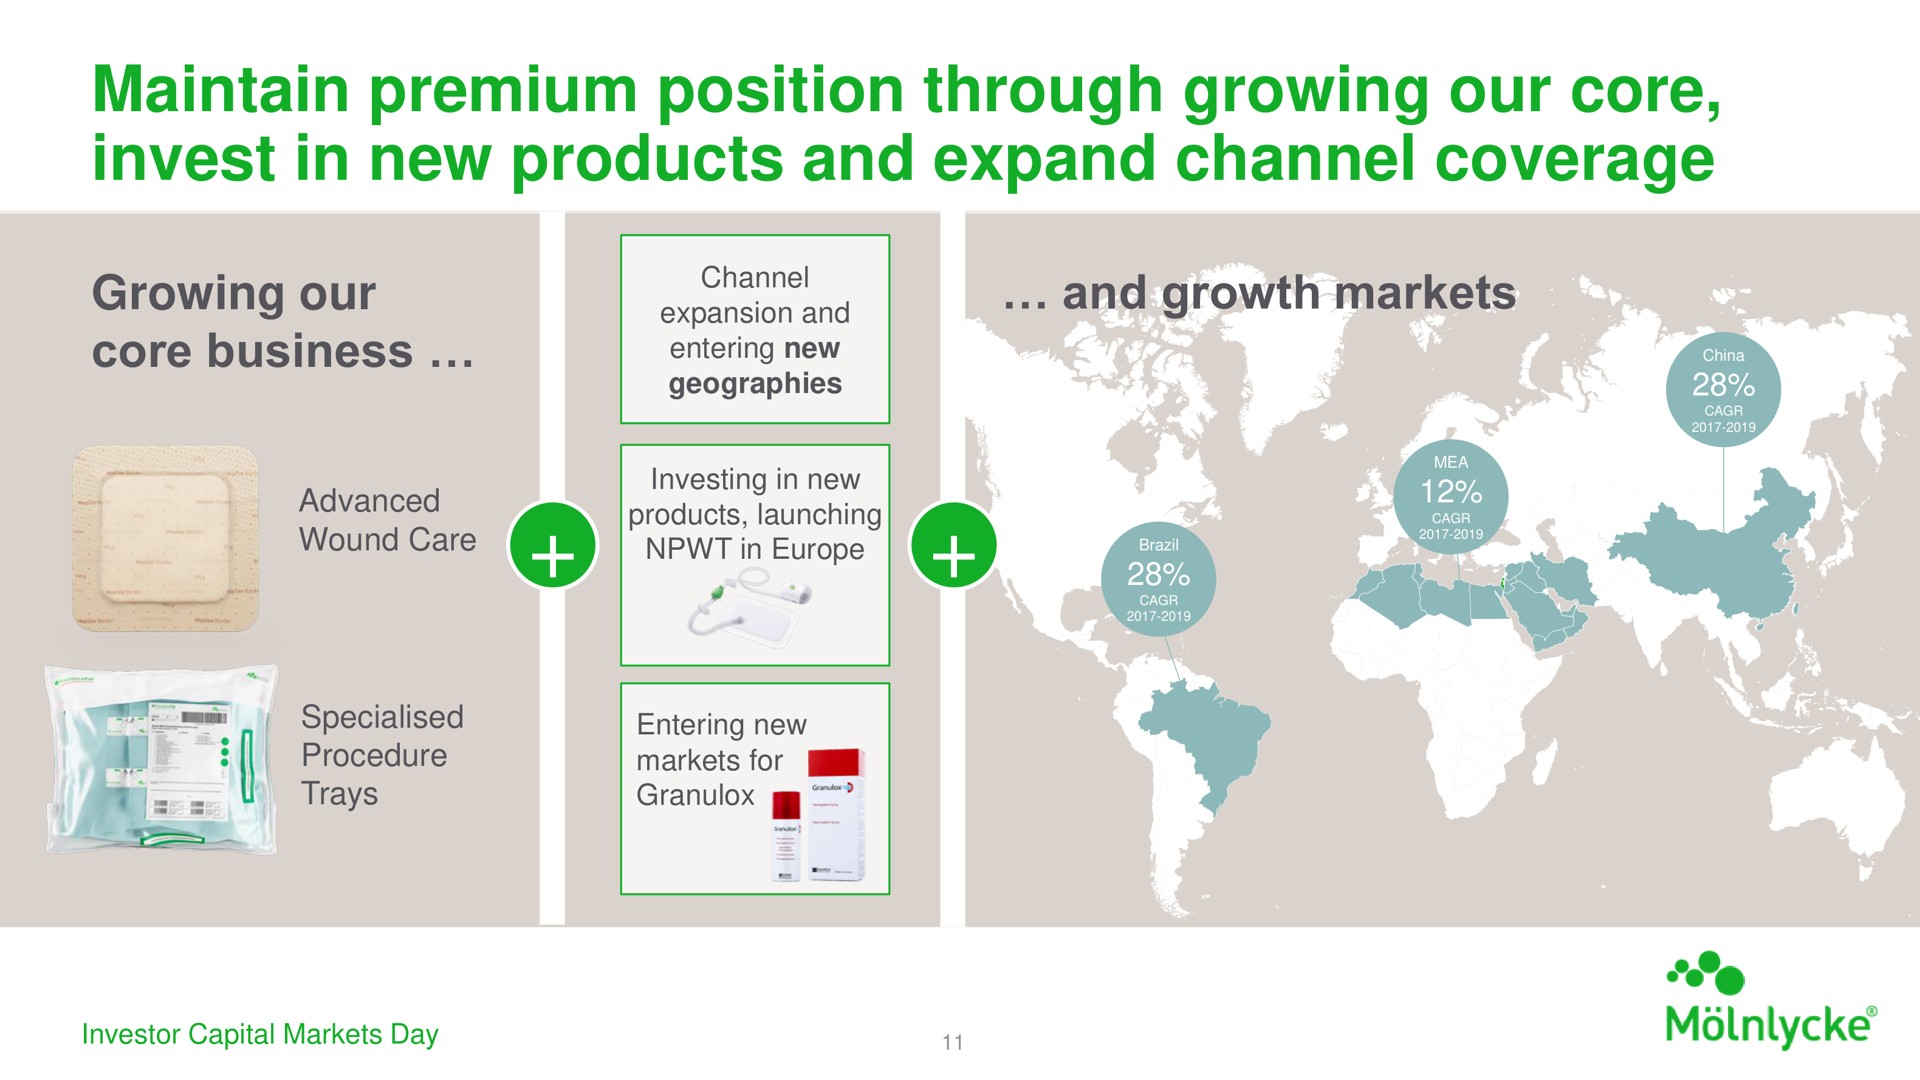 maintain premium position through growing our core invest in new products and expand channel coverage expansion growth markets | Investor AB